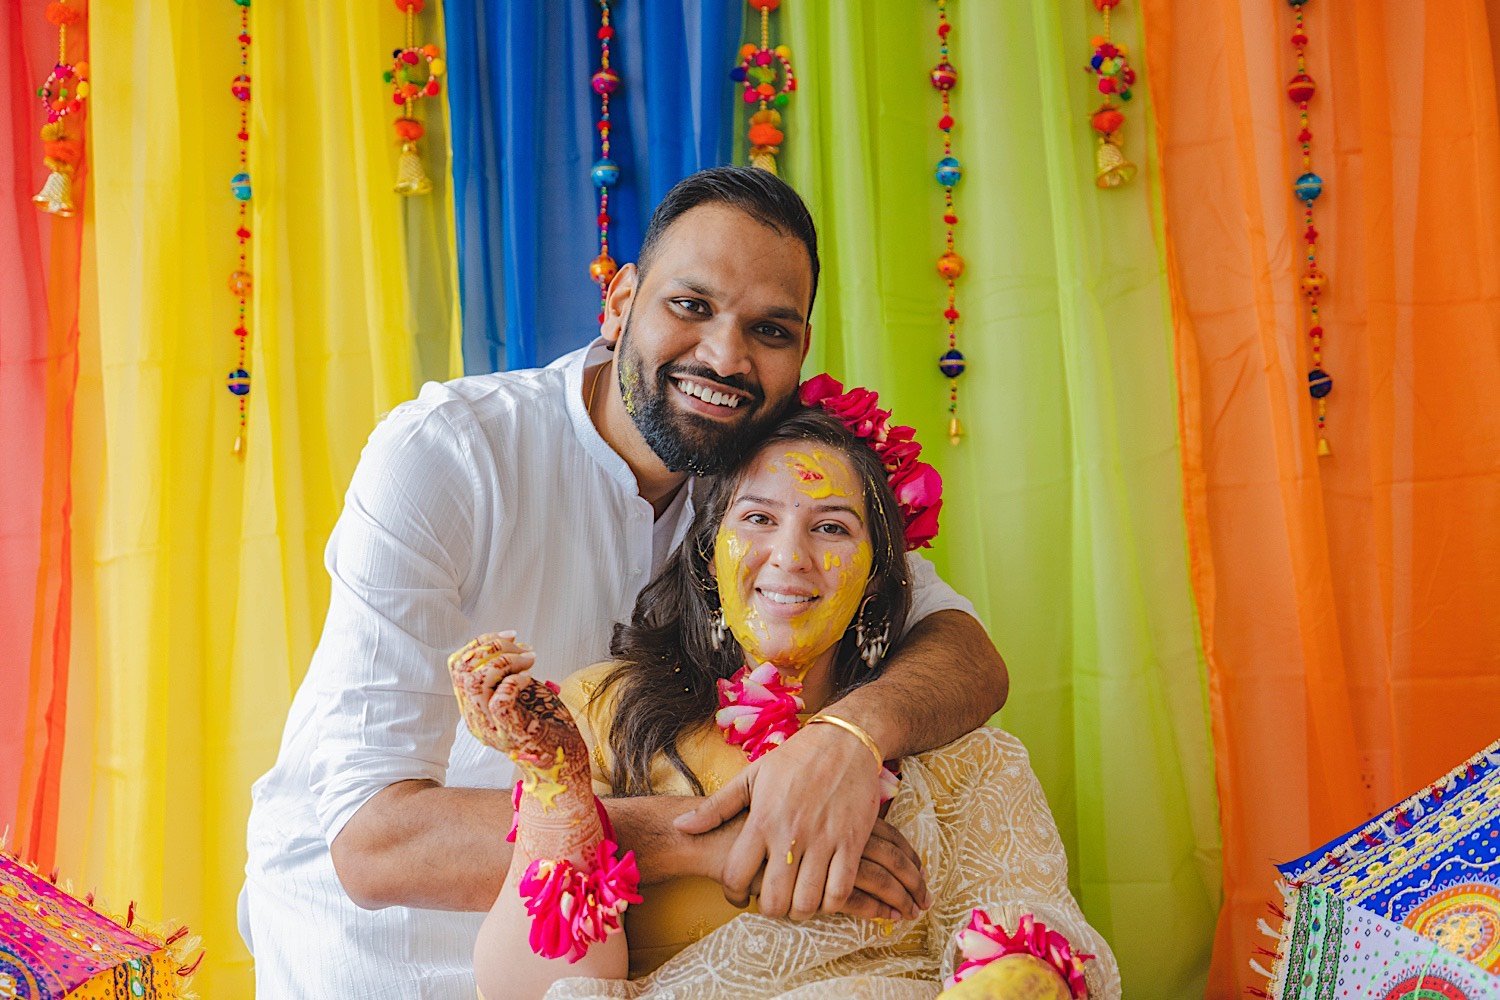 Man hugs his fiancee from behind while she's covered in turmeric during traditional Haldi celebration